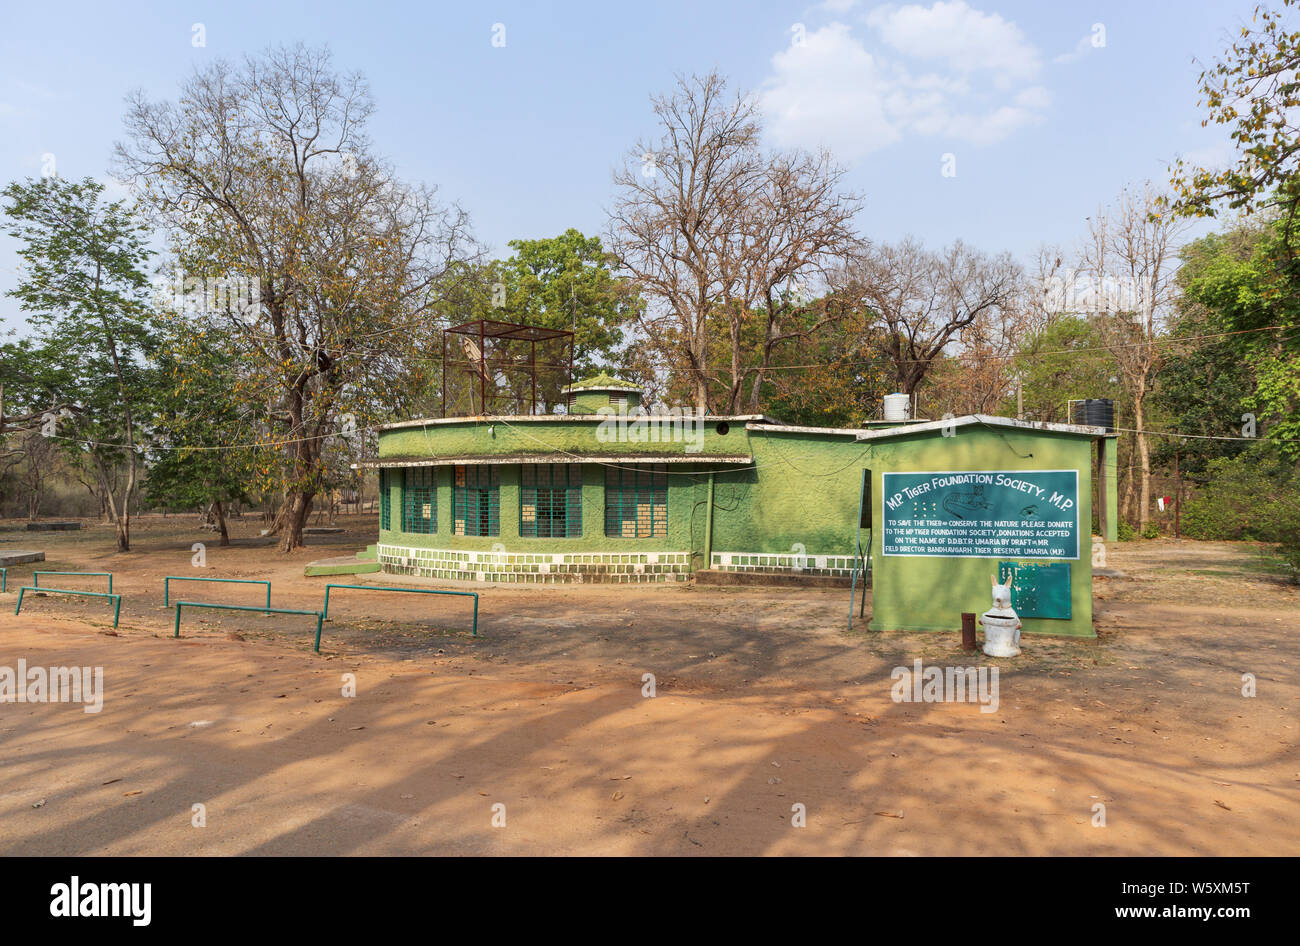 Tiger Foundation Society building at the Tala Gate entrance to Bandhavgarh National Park, Umaria district of the central Indian state Madhya Pradesh Stock Photo